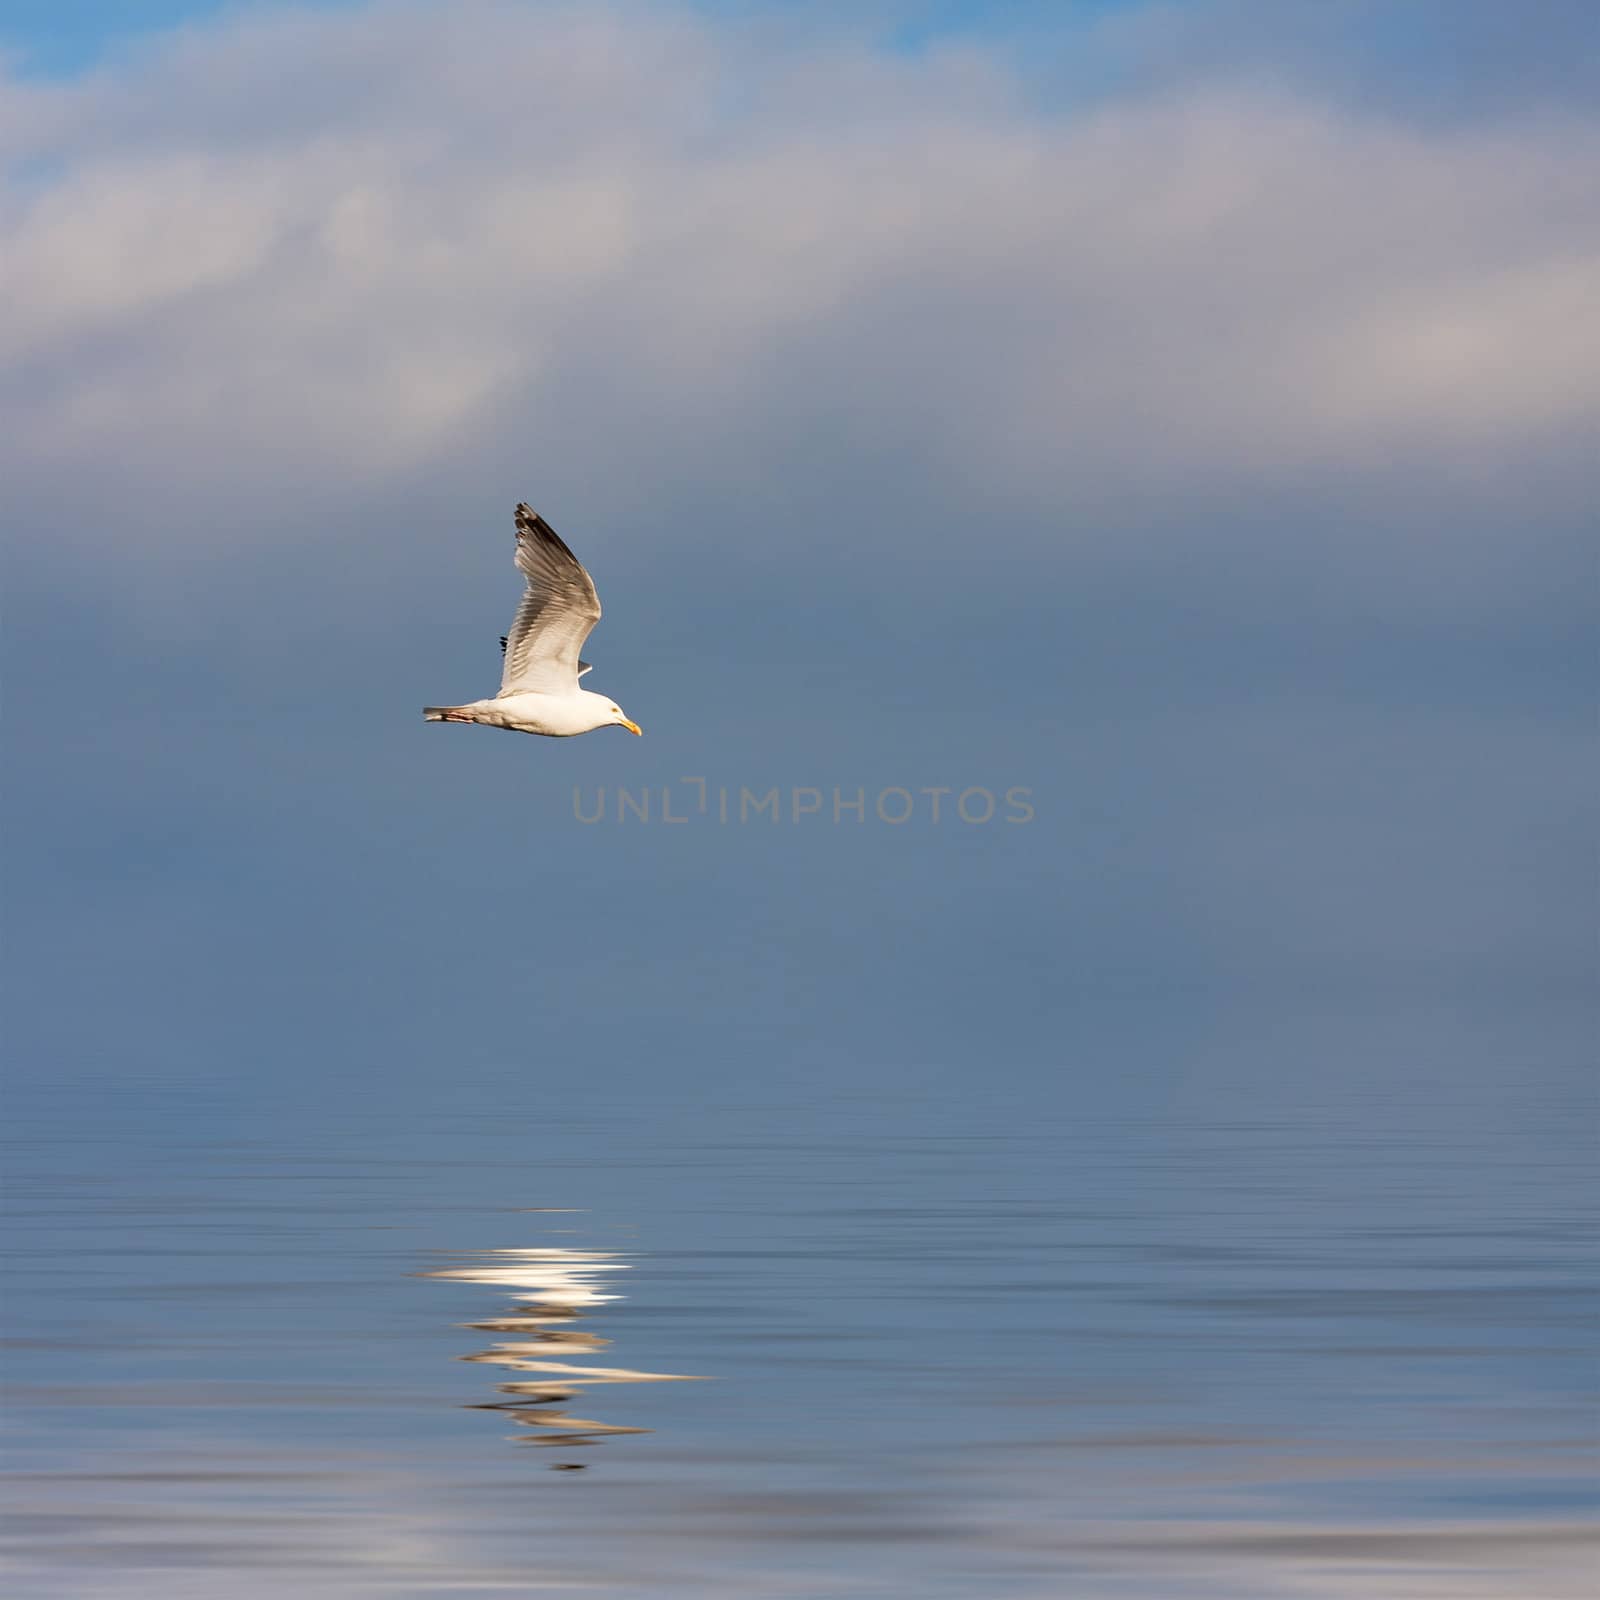 A large seagull flying over a blue sky with a reflection coming off the water.